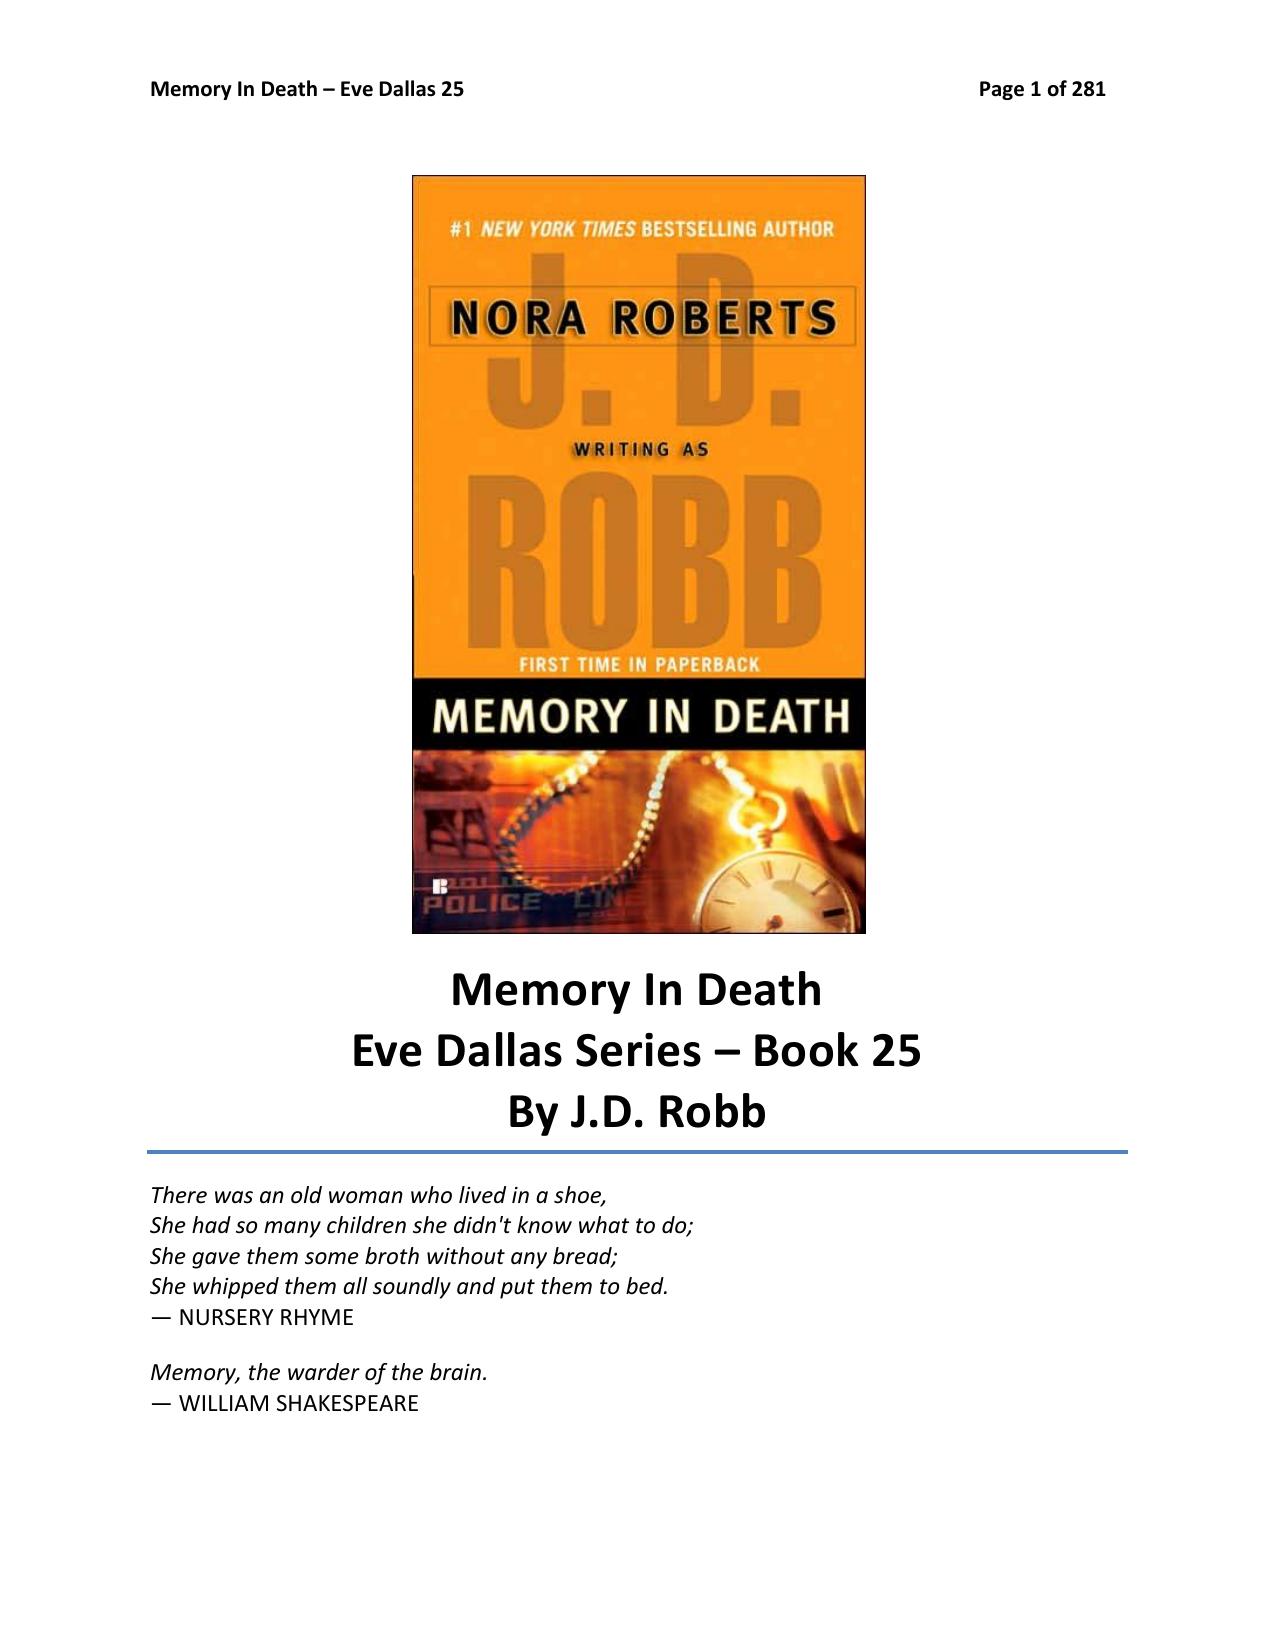 Memory In Death by J.D. Robb